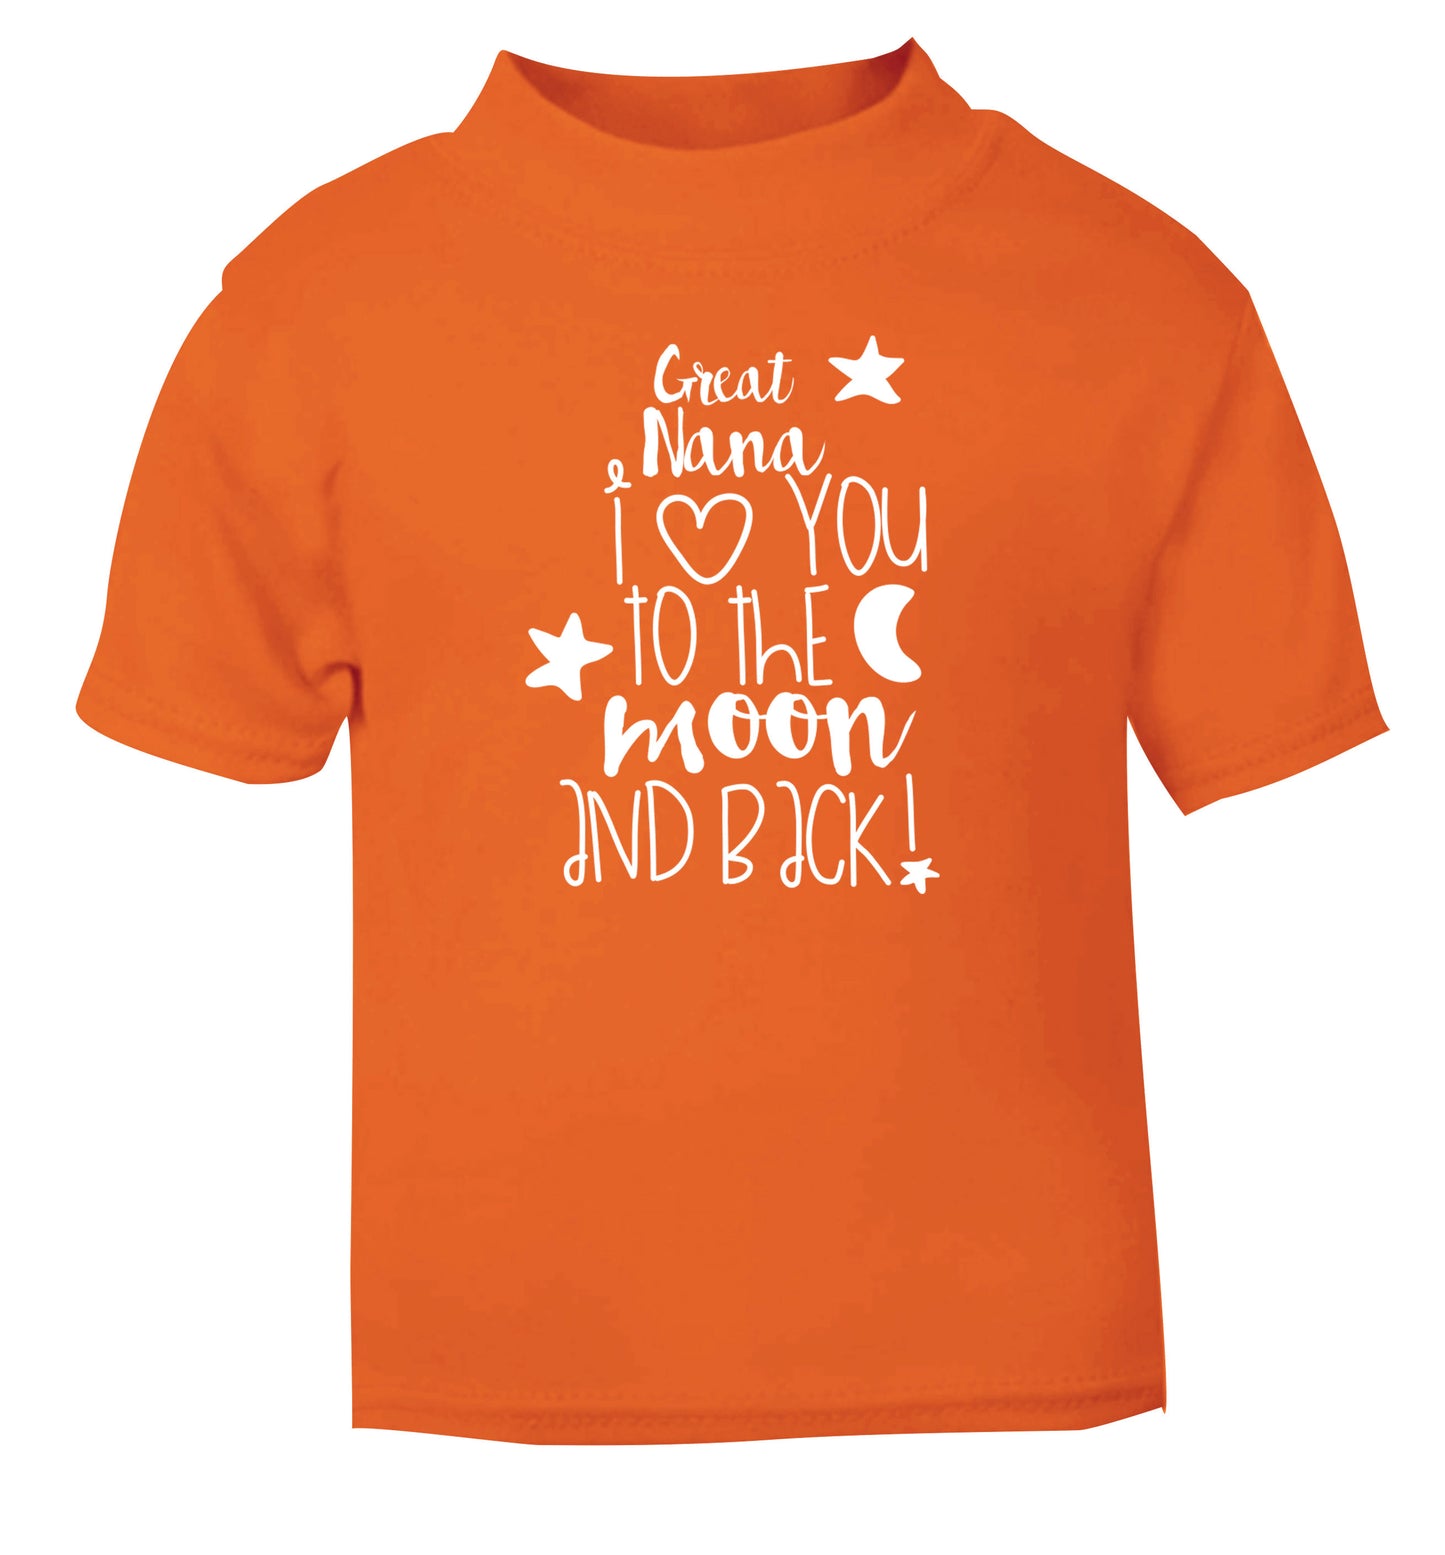 Great Nana I love you to the moon and back orange Baby Toddler Tshirt 2 Years